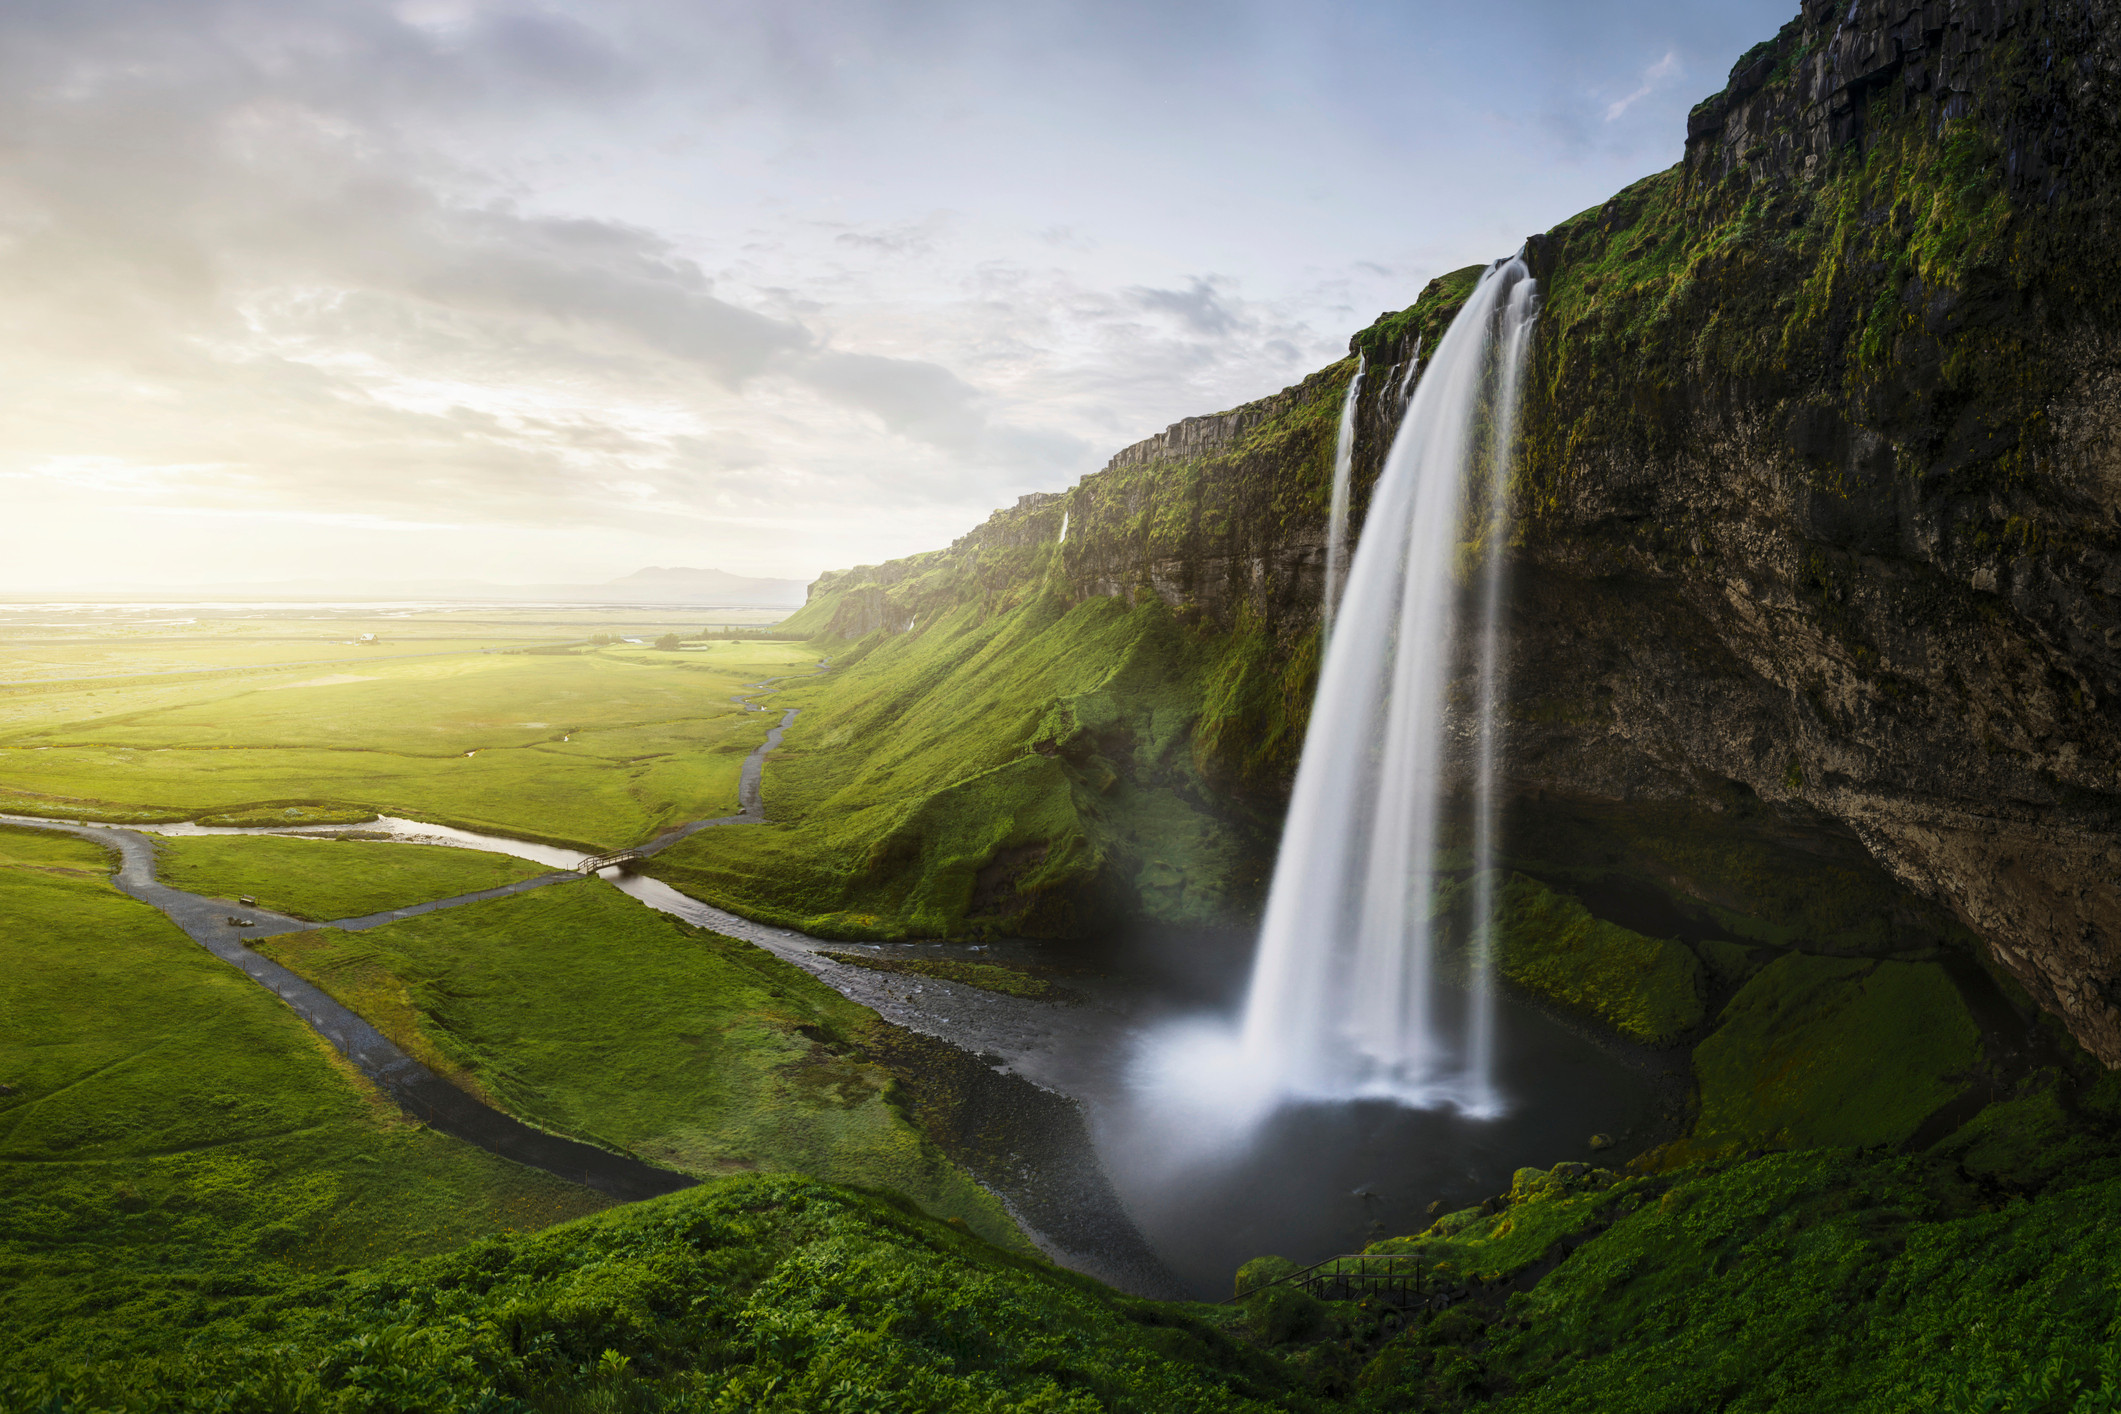 Iceland travel restrictions: Can I visit Iceland from England?